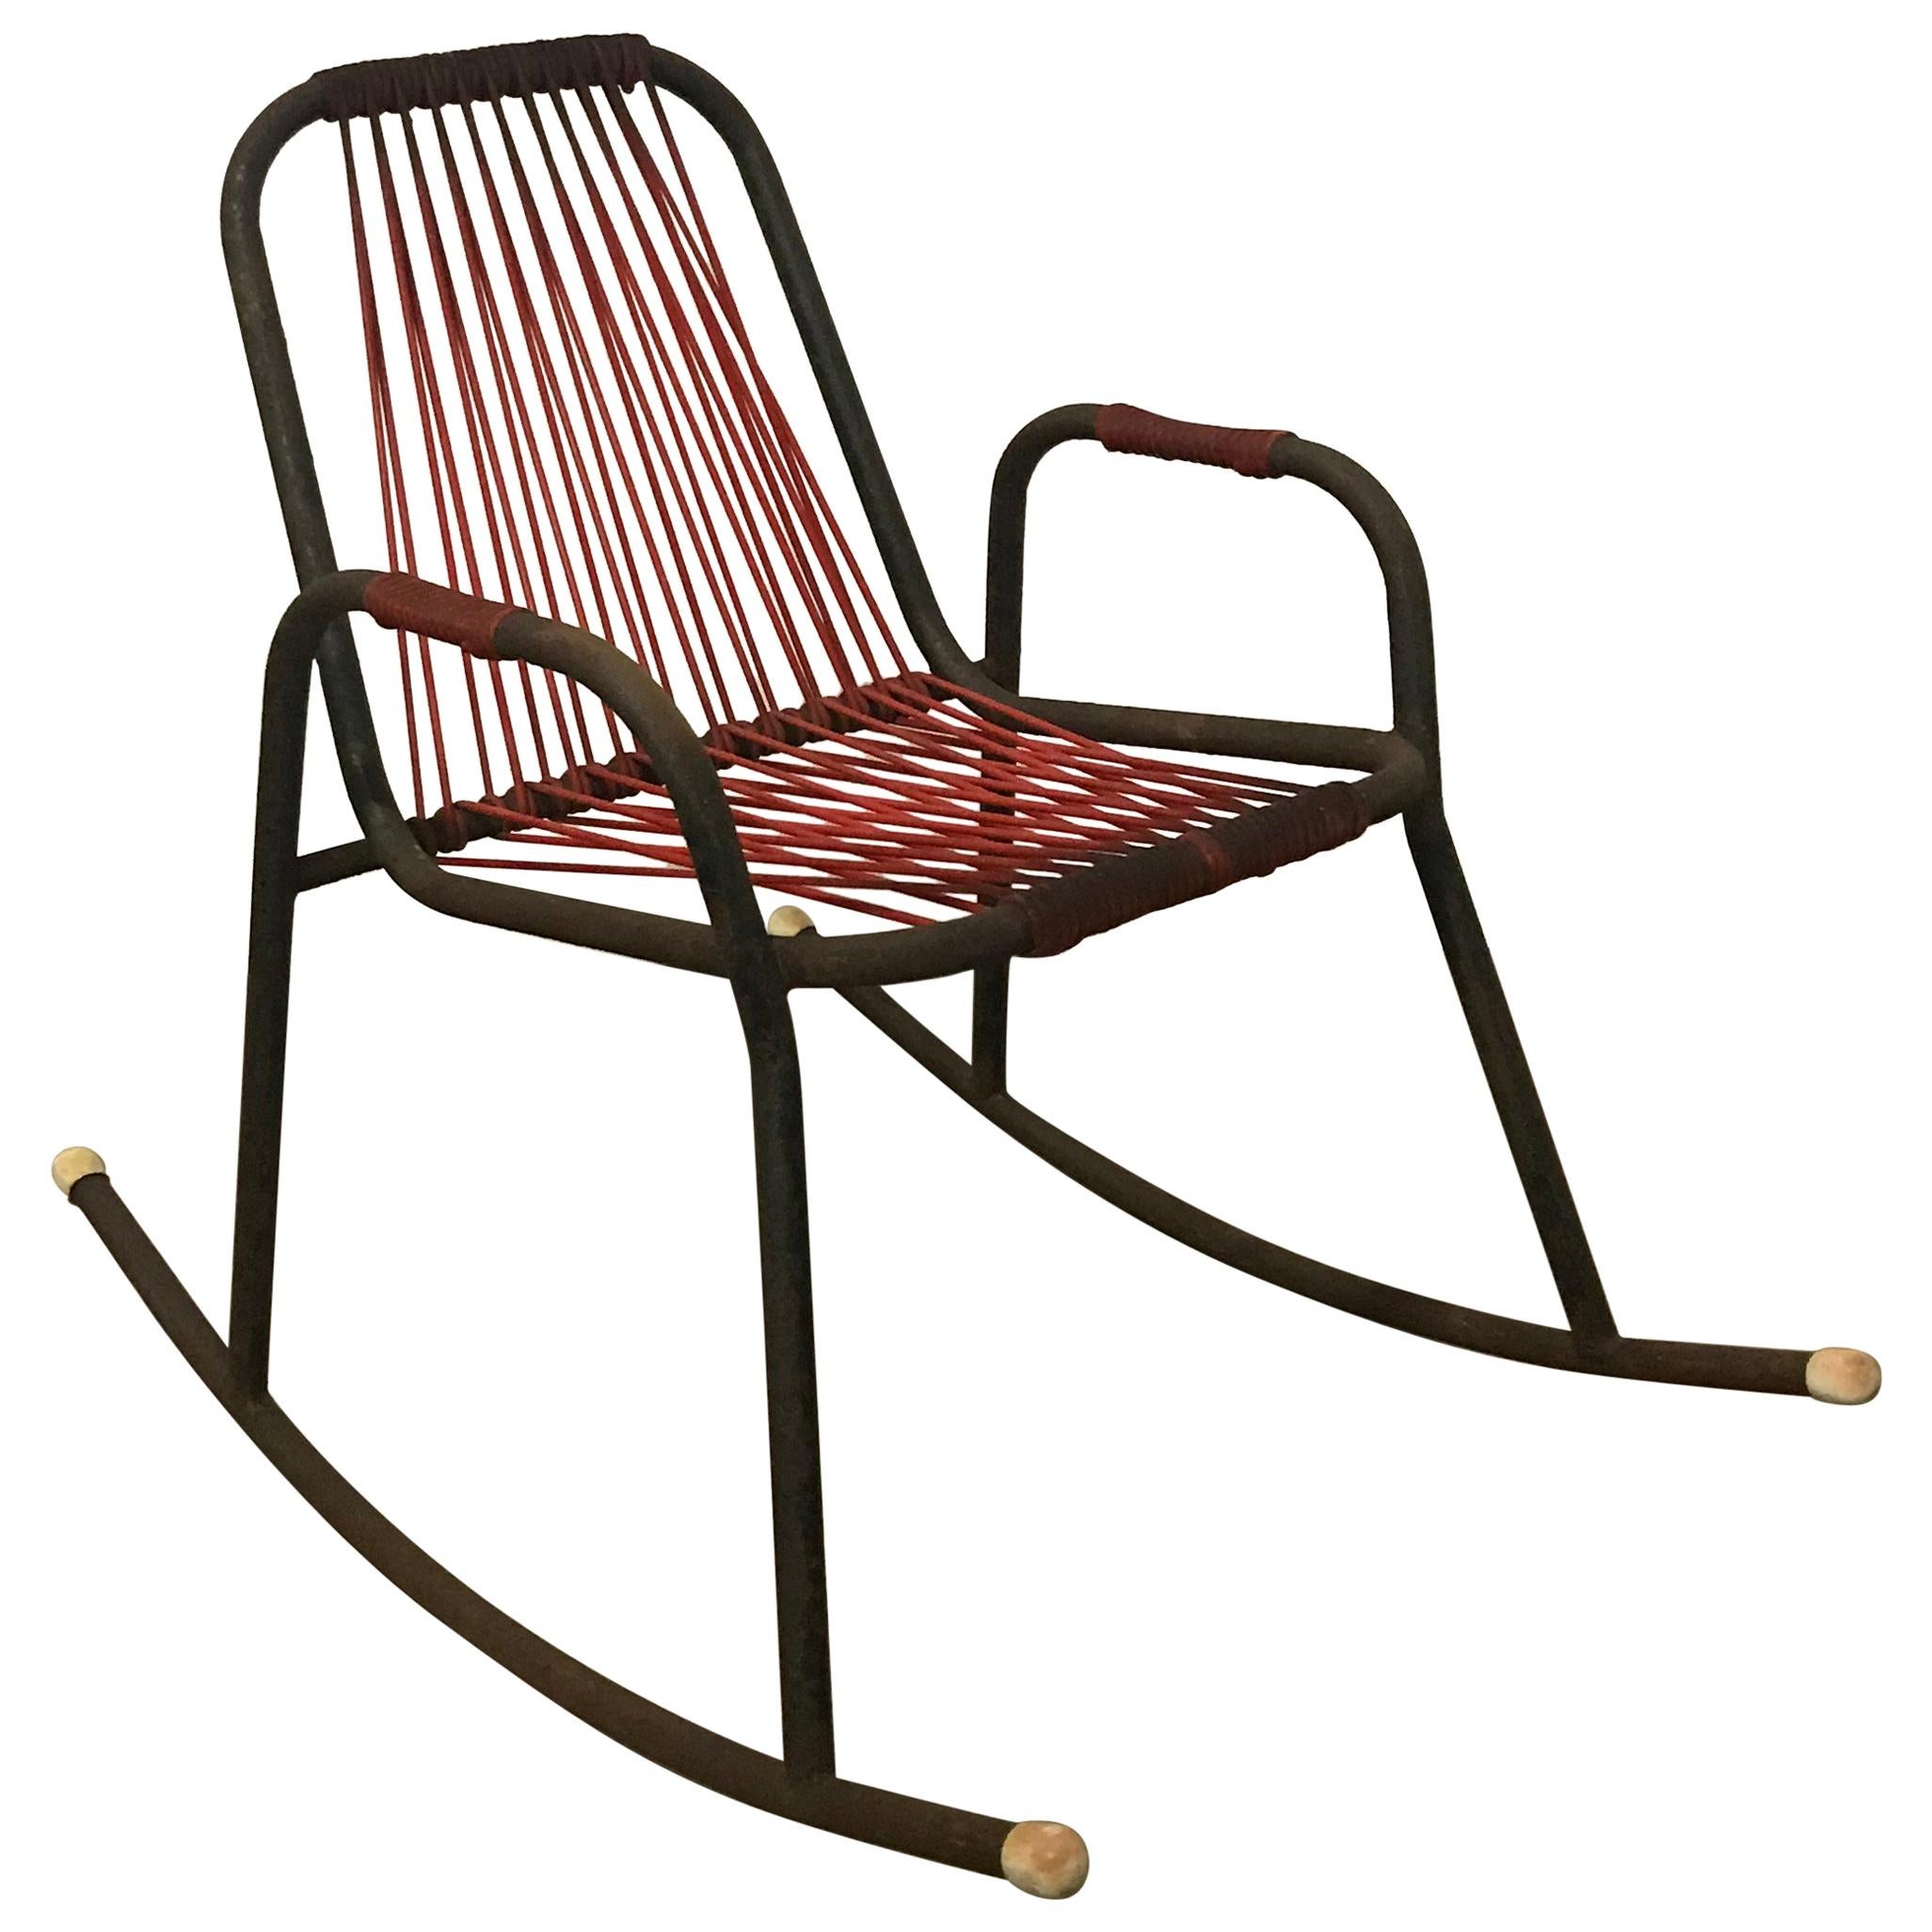 1960s Rocking Chair in Red Plastic Strings on Black Metal Frame For Sale